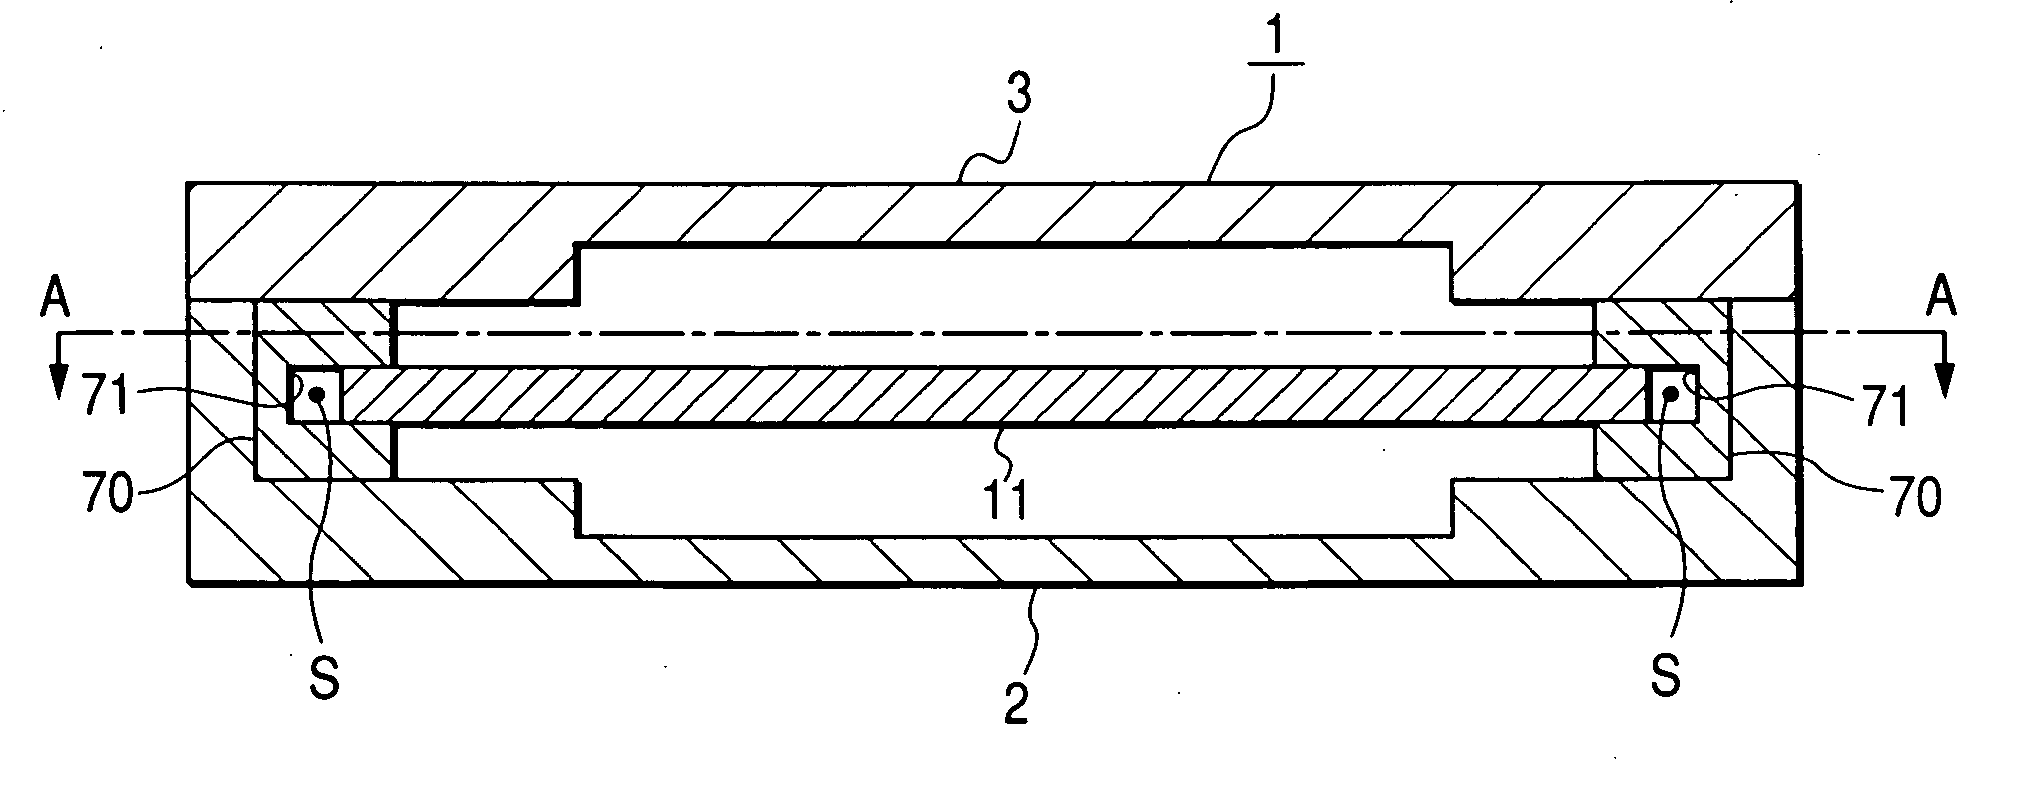 Electronic apparatus including circuit board chassis